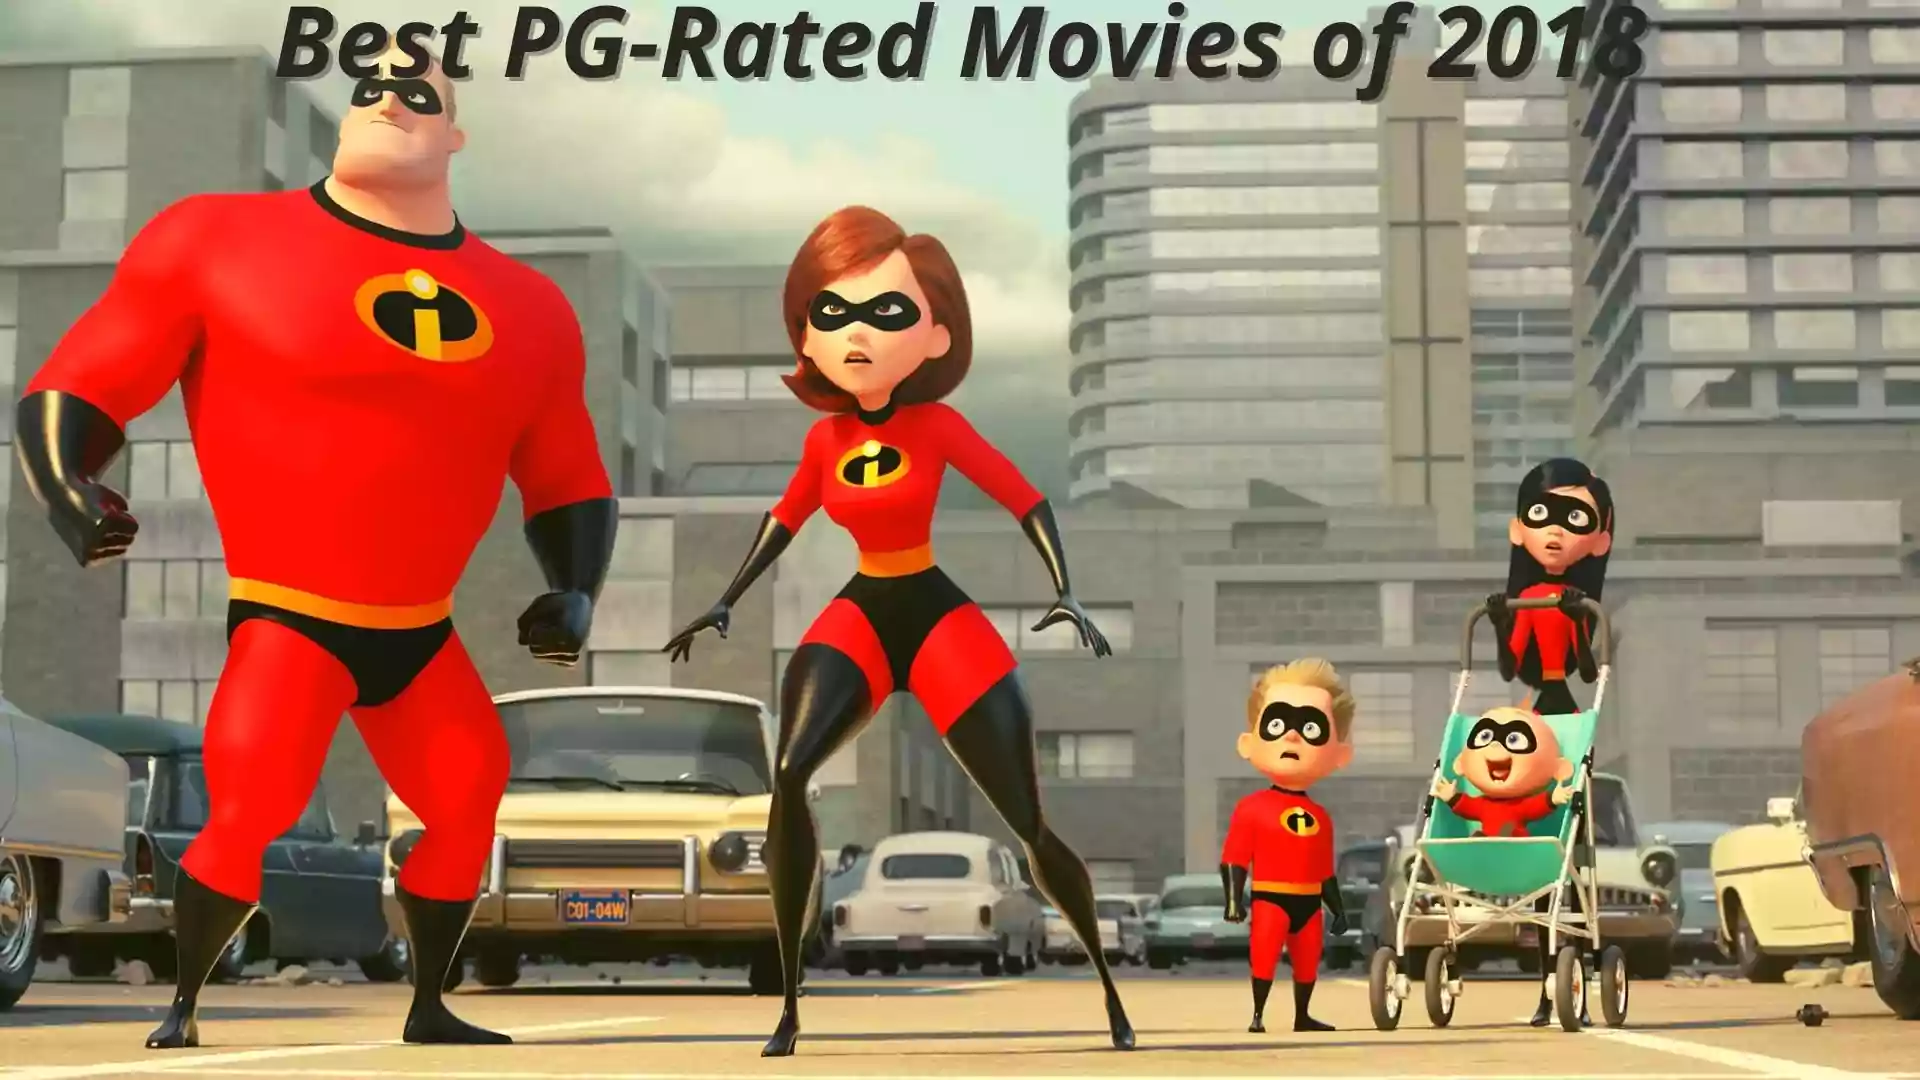 Best PG-Rated Movies of 2018